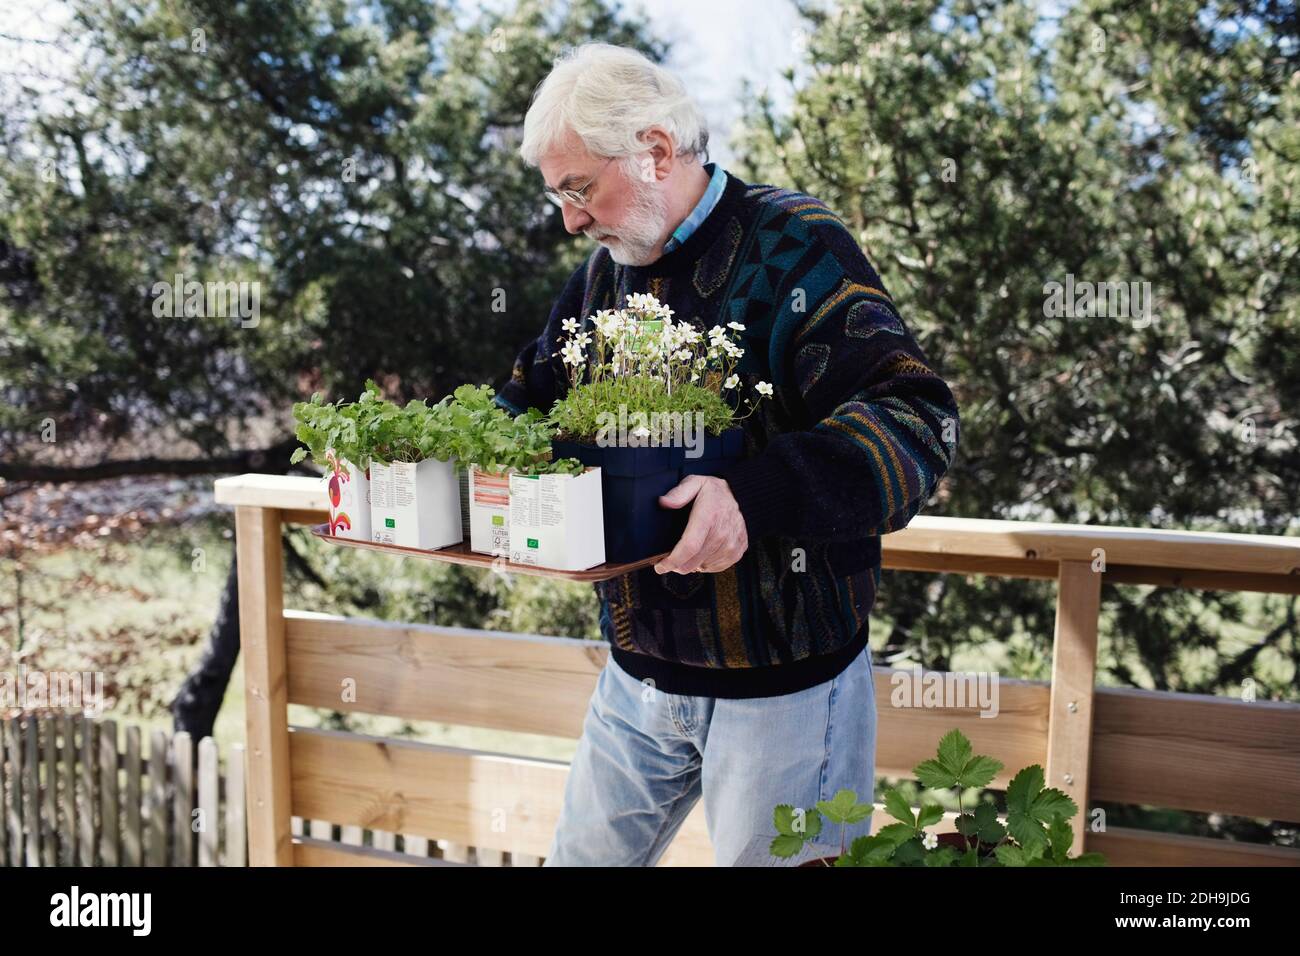 Senior man carrying seedling tray while standing in yard Stock Photo